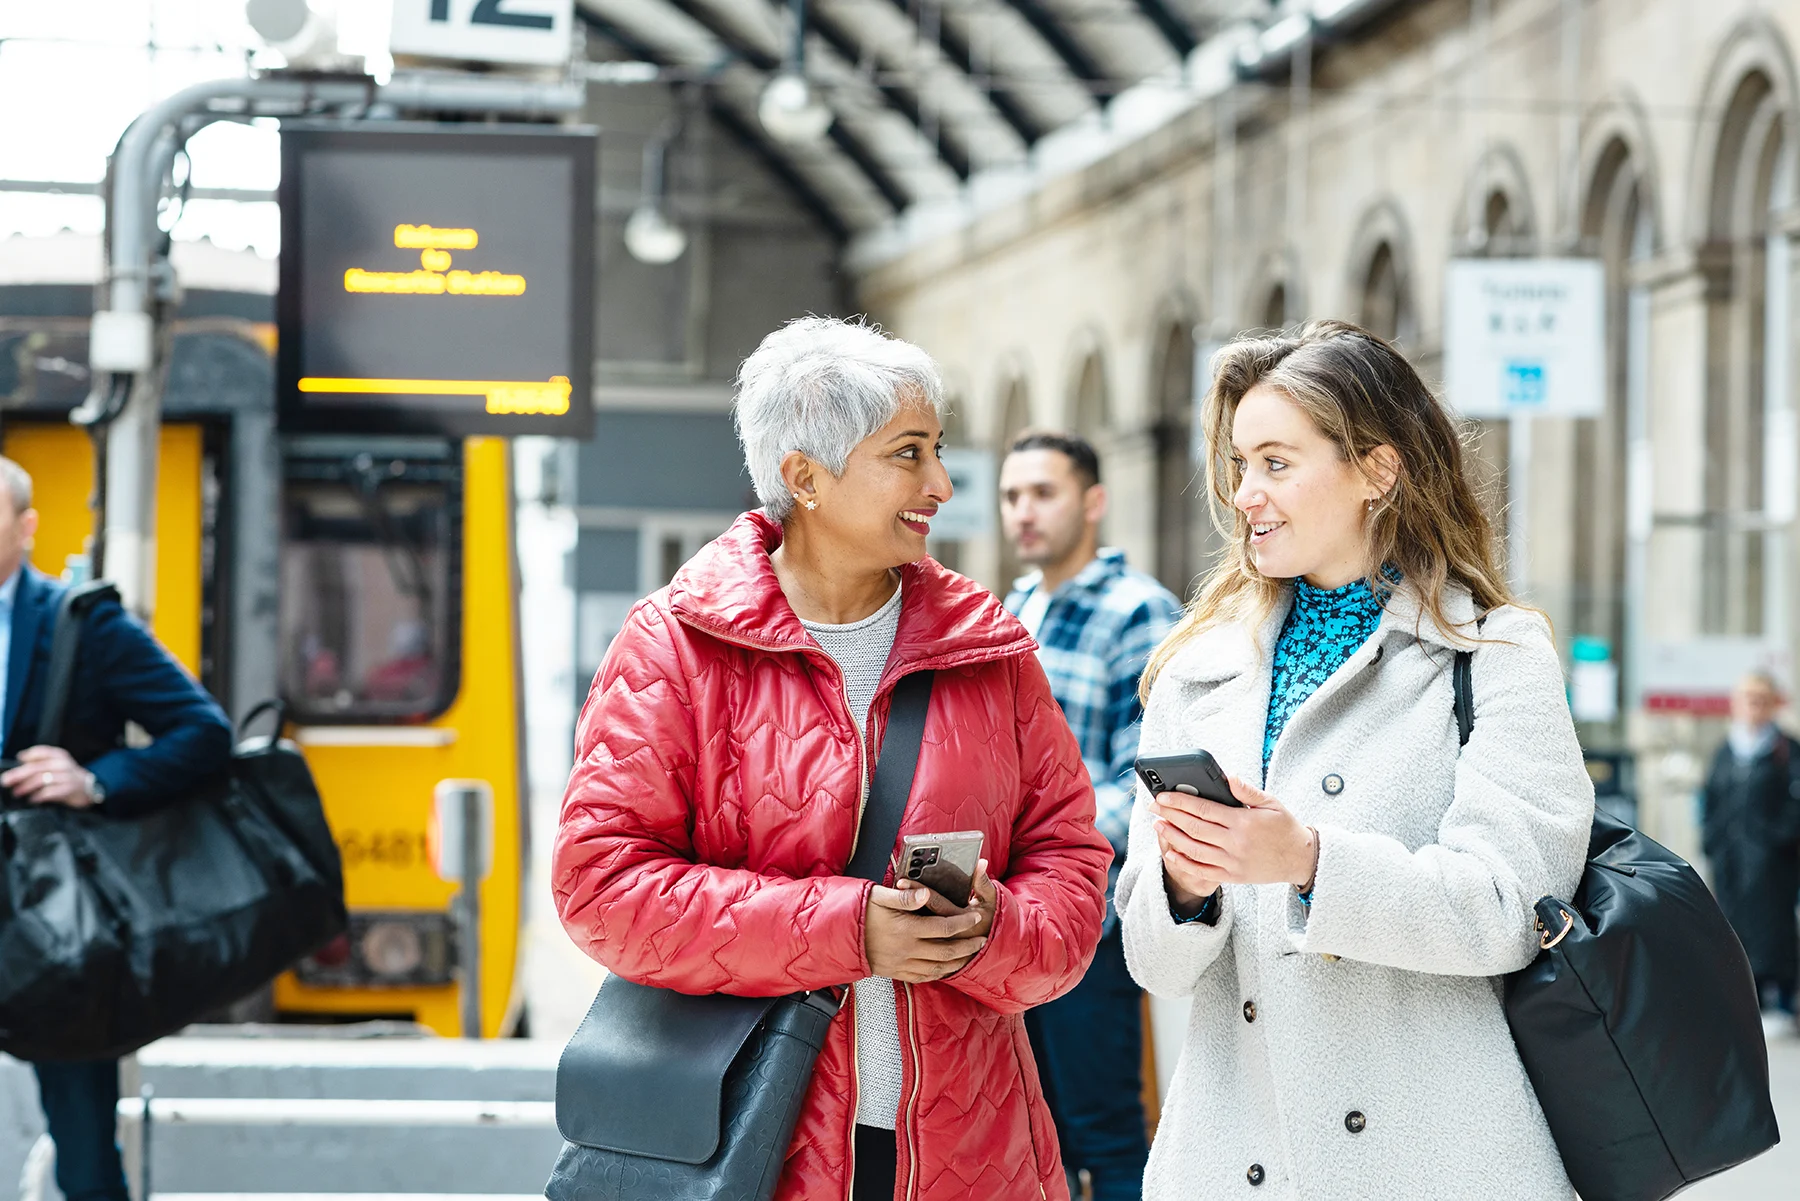 A middle-aged woman with short grey hair and a younger woman with long brown/blonde hair chat at a train station while checking their phones. 